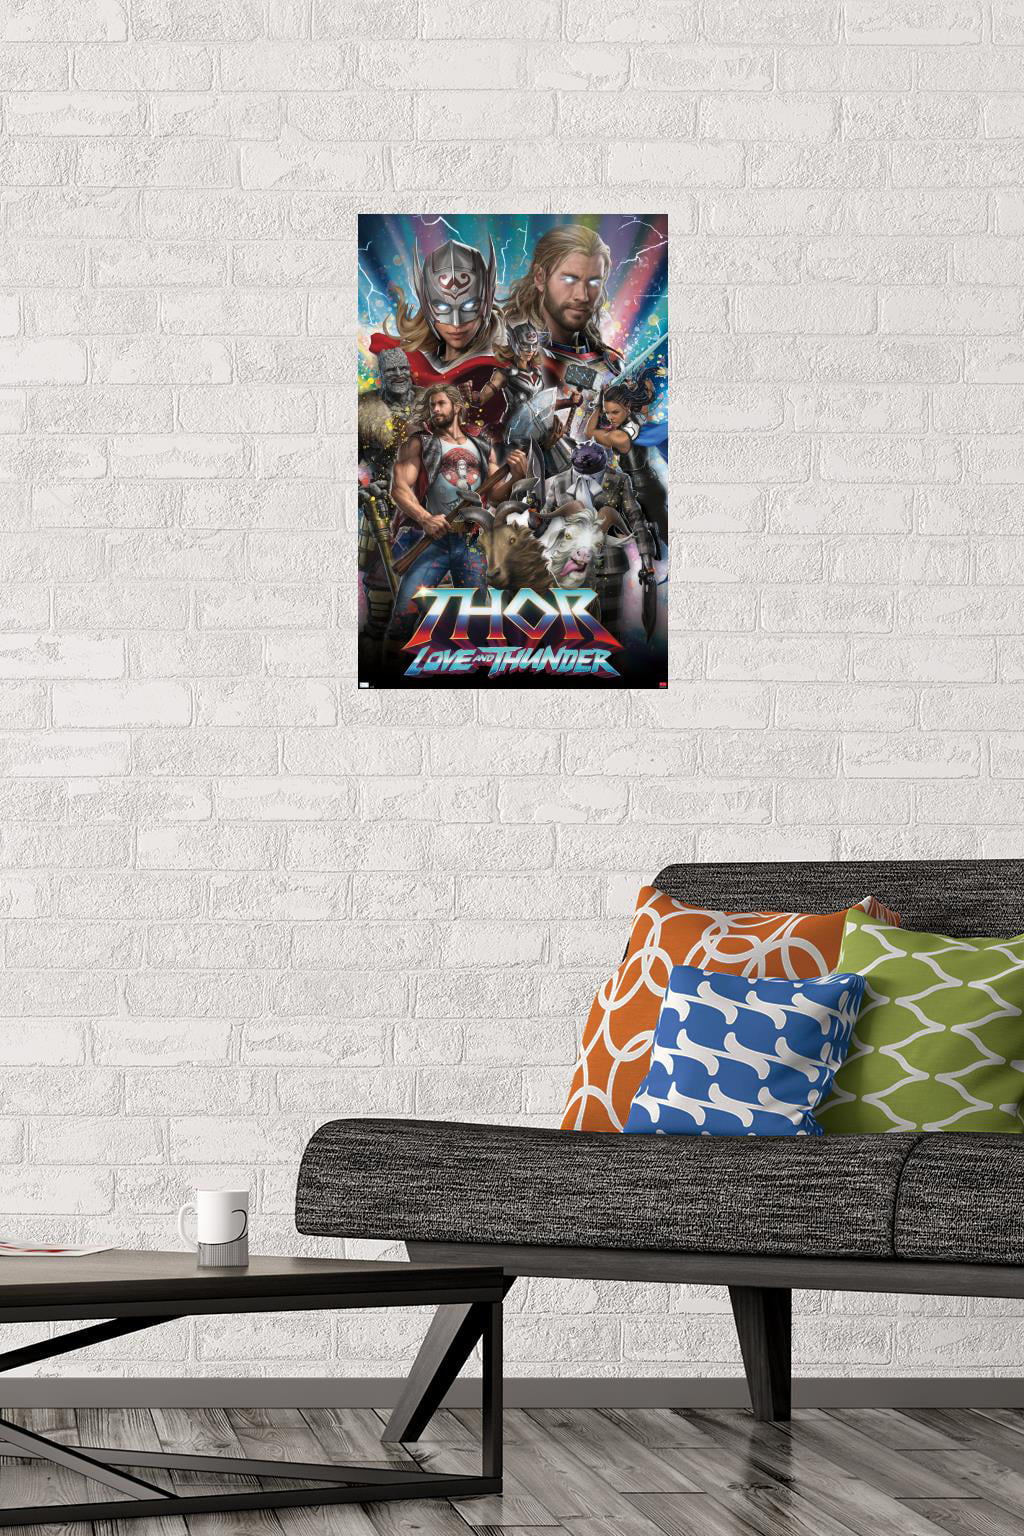 Hercules In Thor Love And Thunder Home Decor Poster Canvas - REVER LAVIE